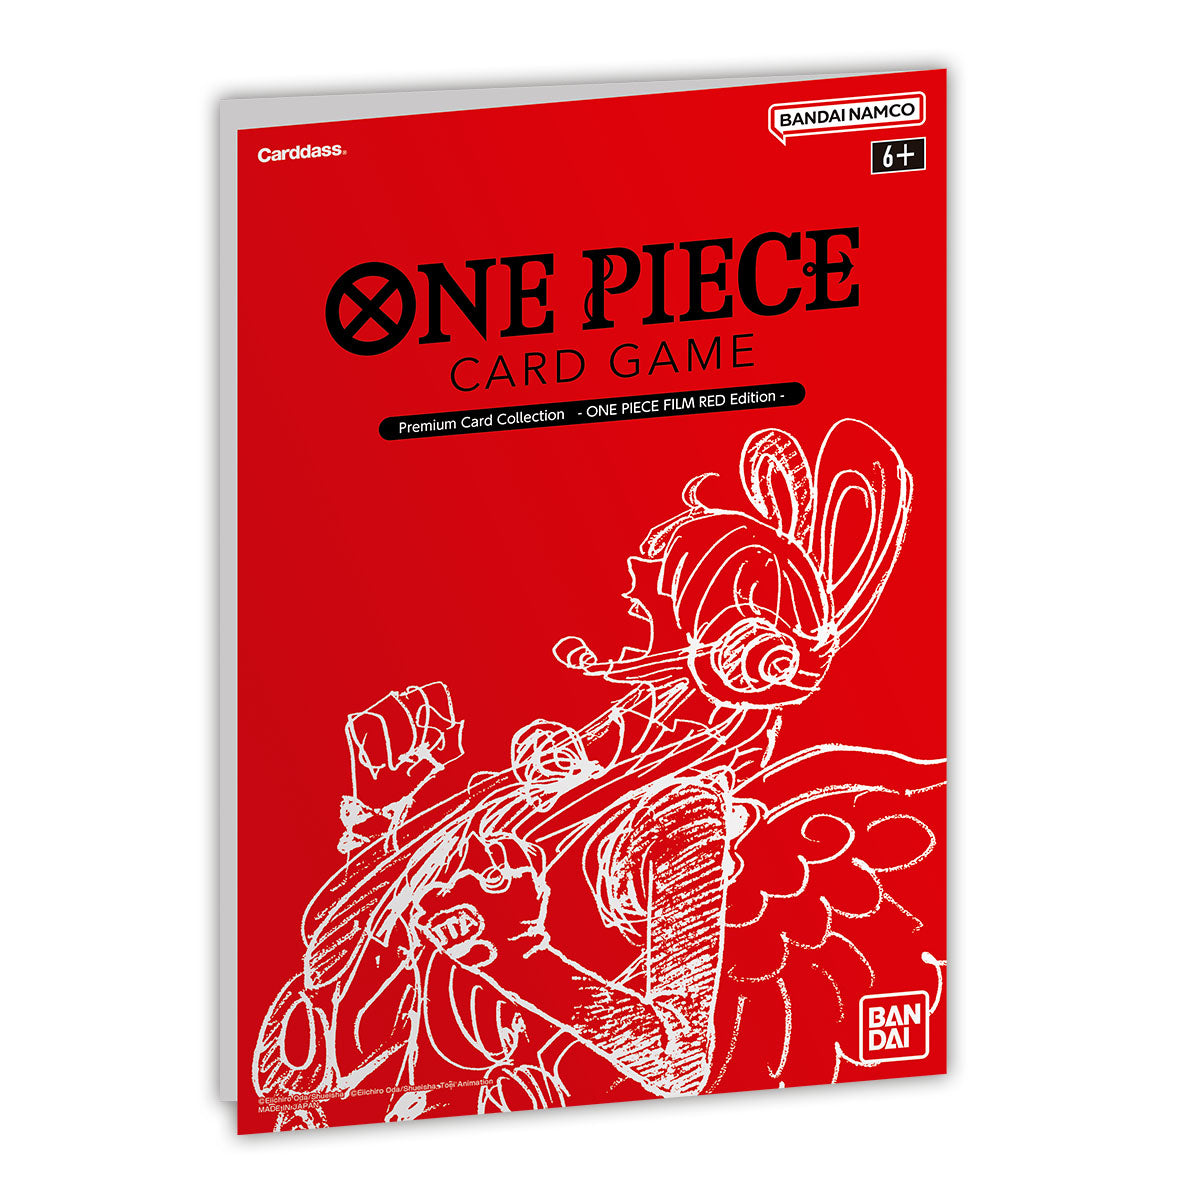 401 Games Canada - One Piece Card Game - Premium Card Collection